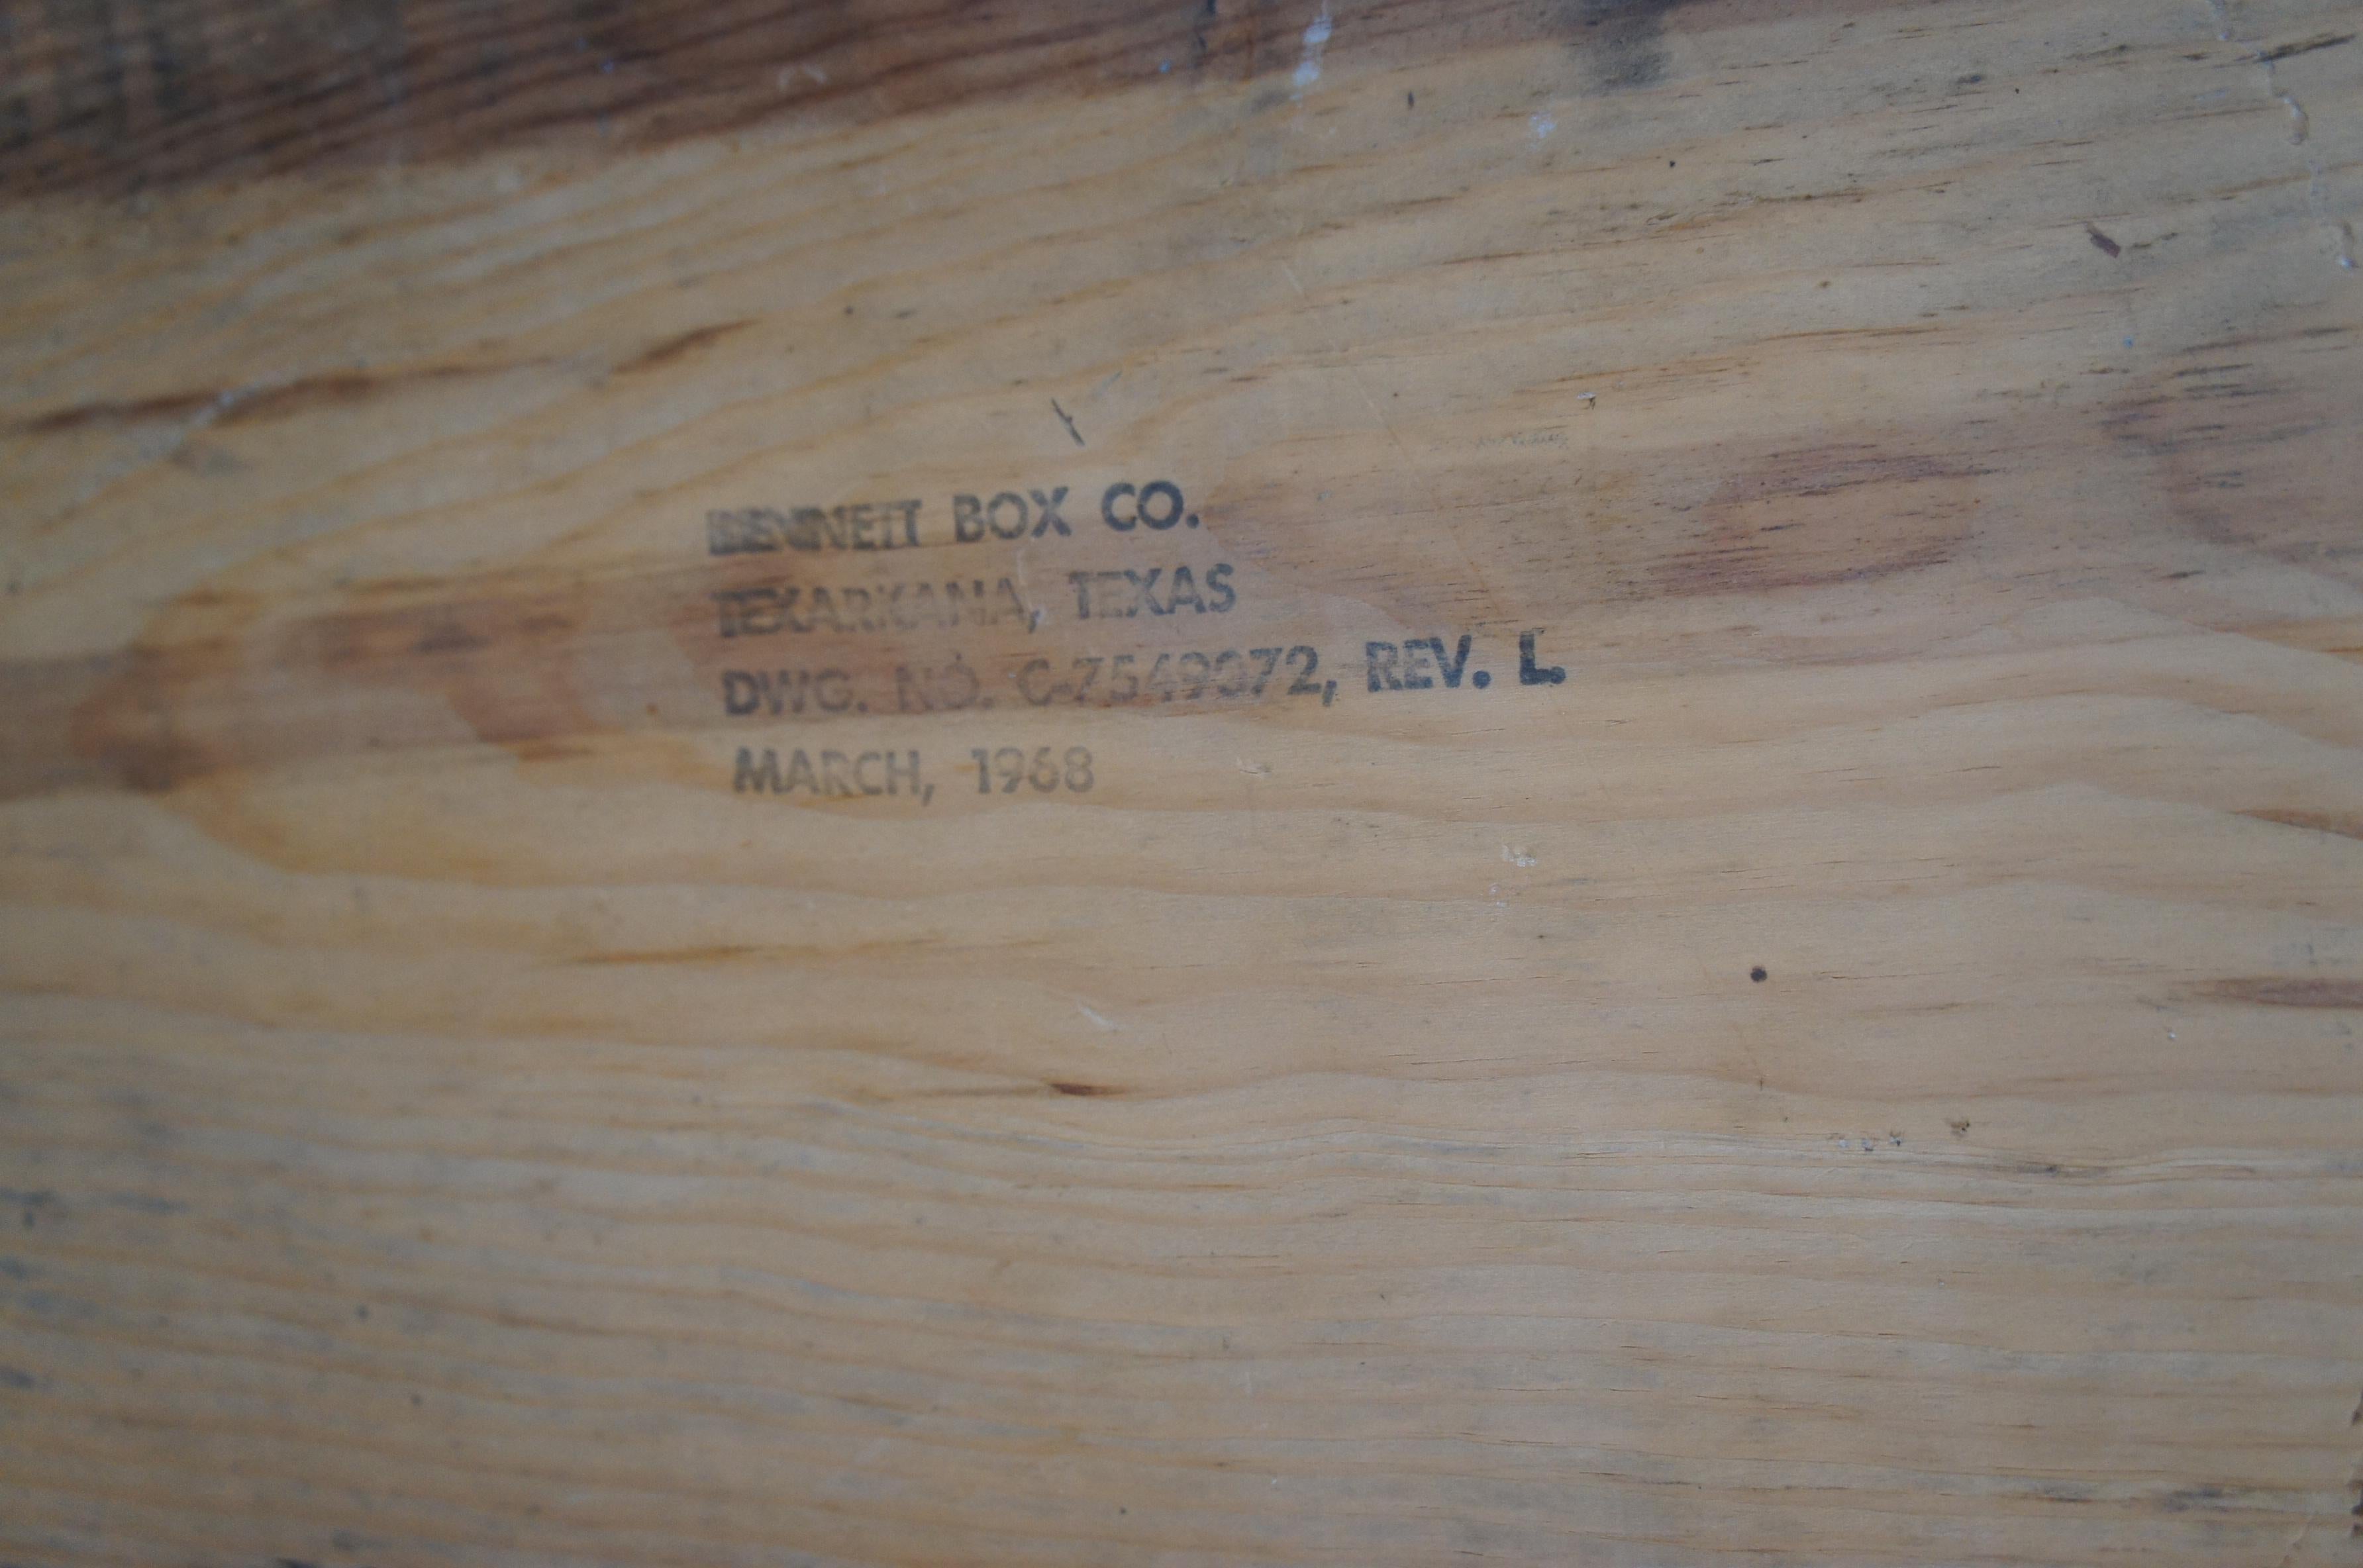 1968 Pine Ammunition for Cannon Without Projectiles Ammo Crate Bennett Box 37